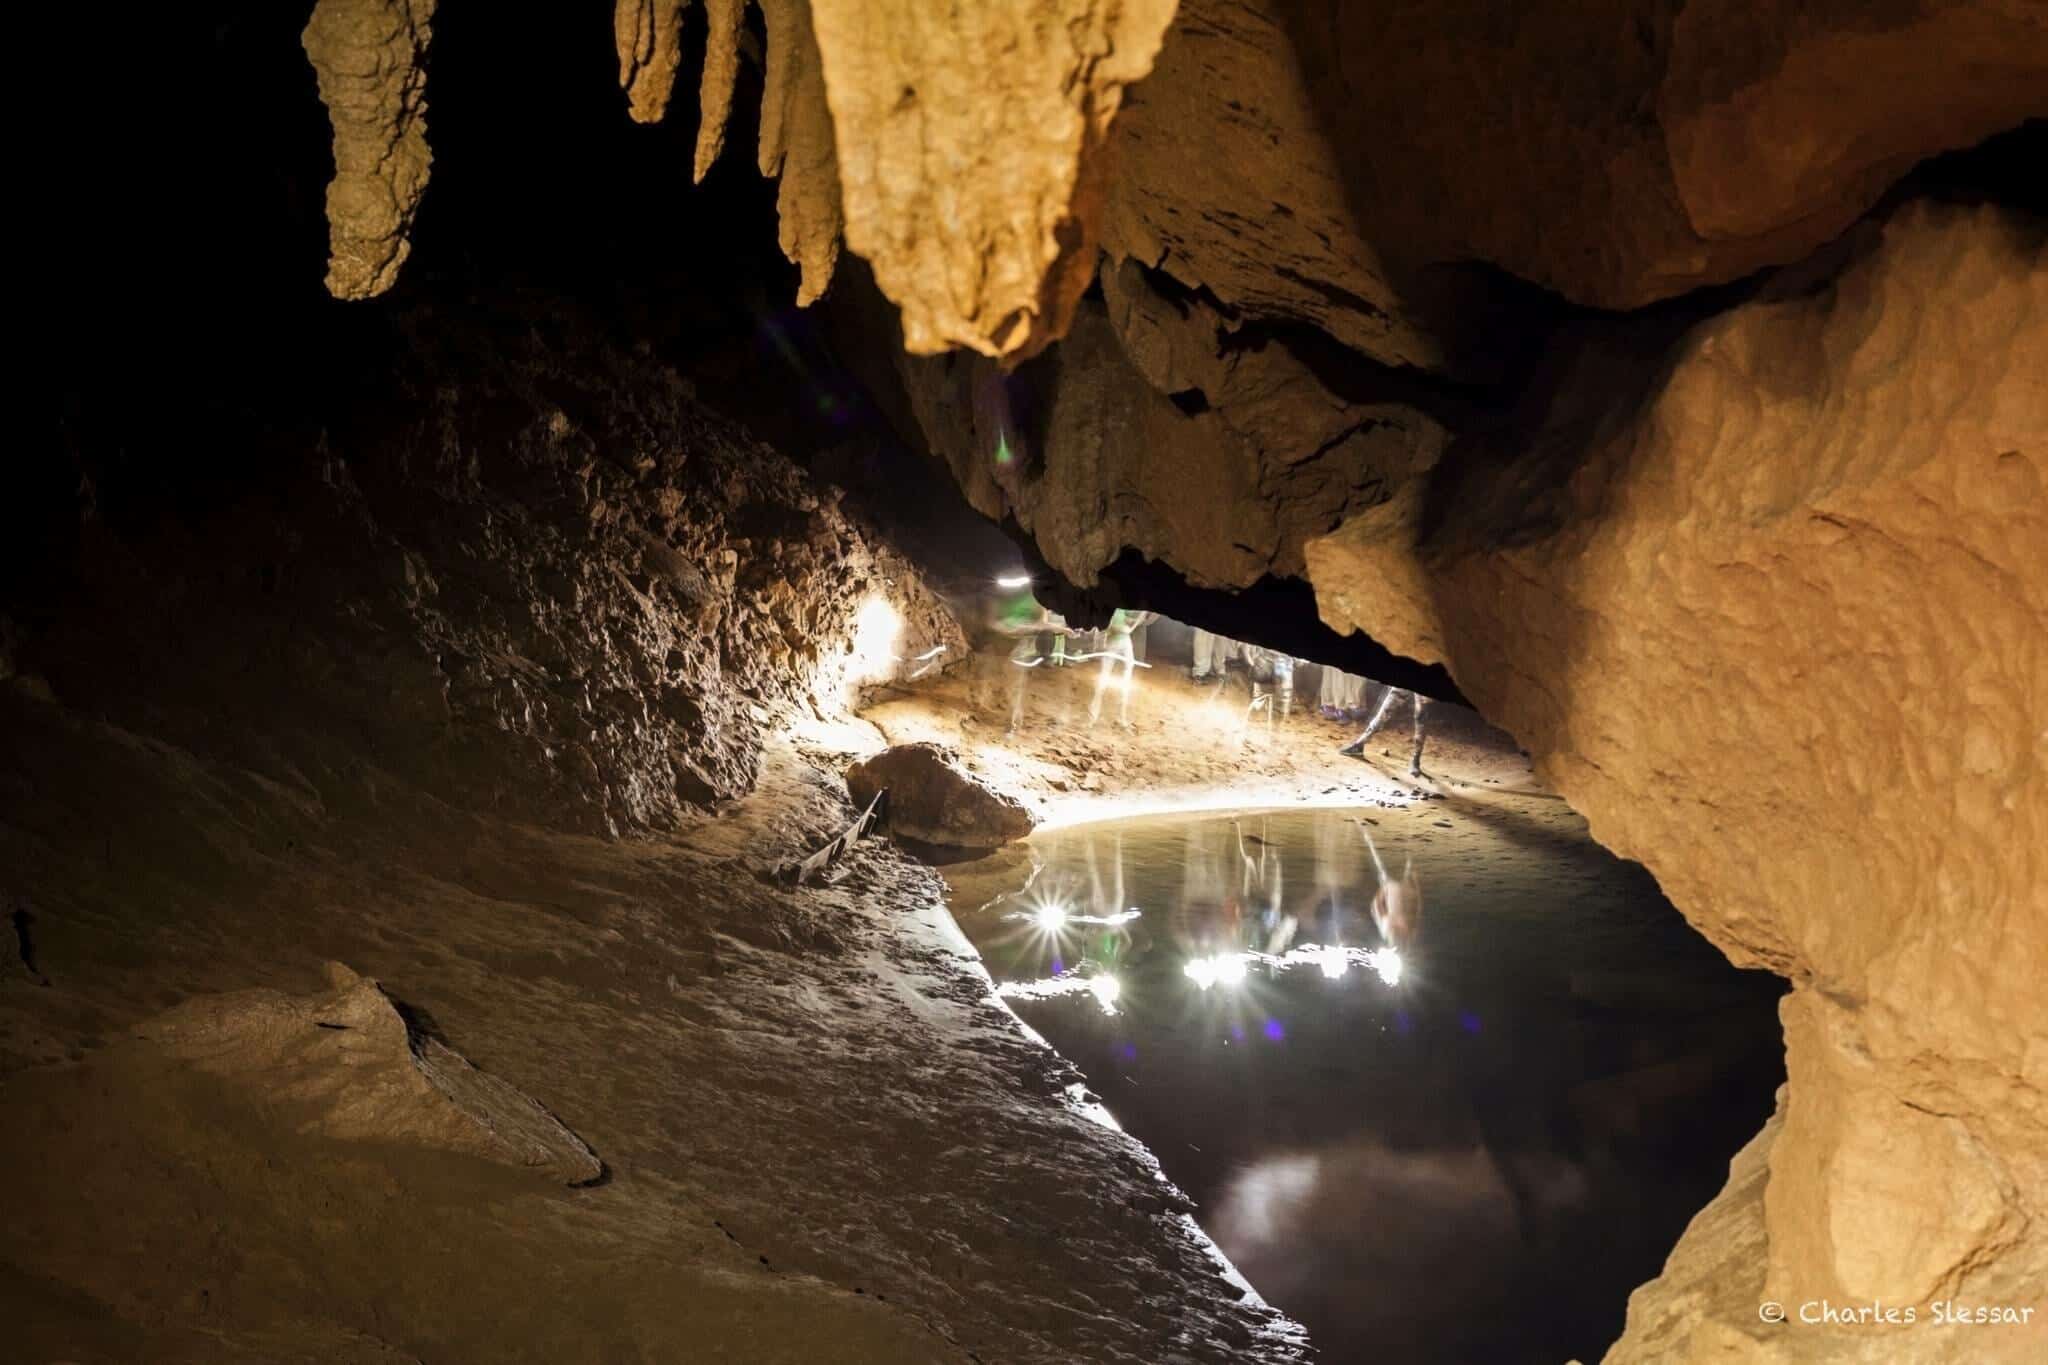 Headlamps reflected in pool in St Herman's cave in Belize